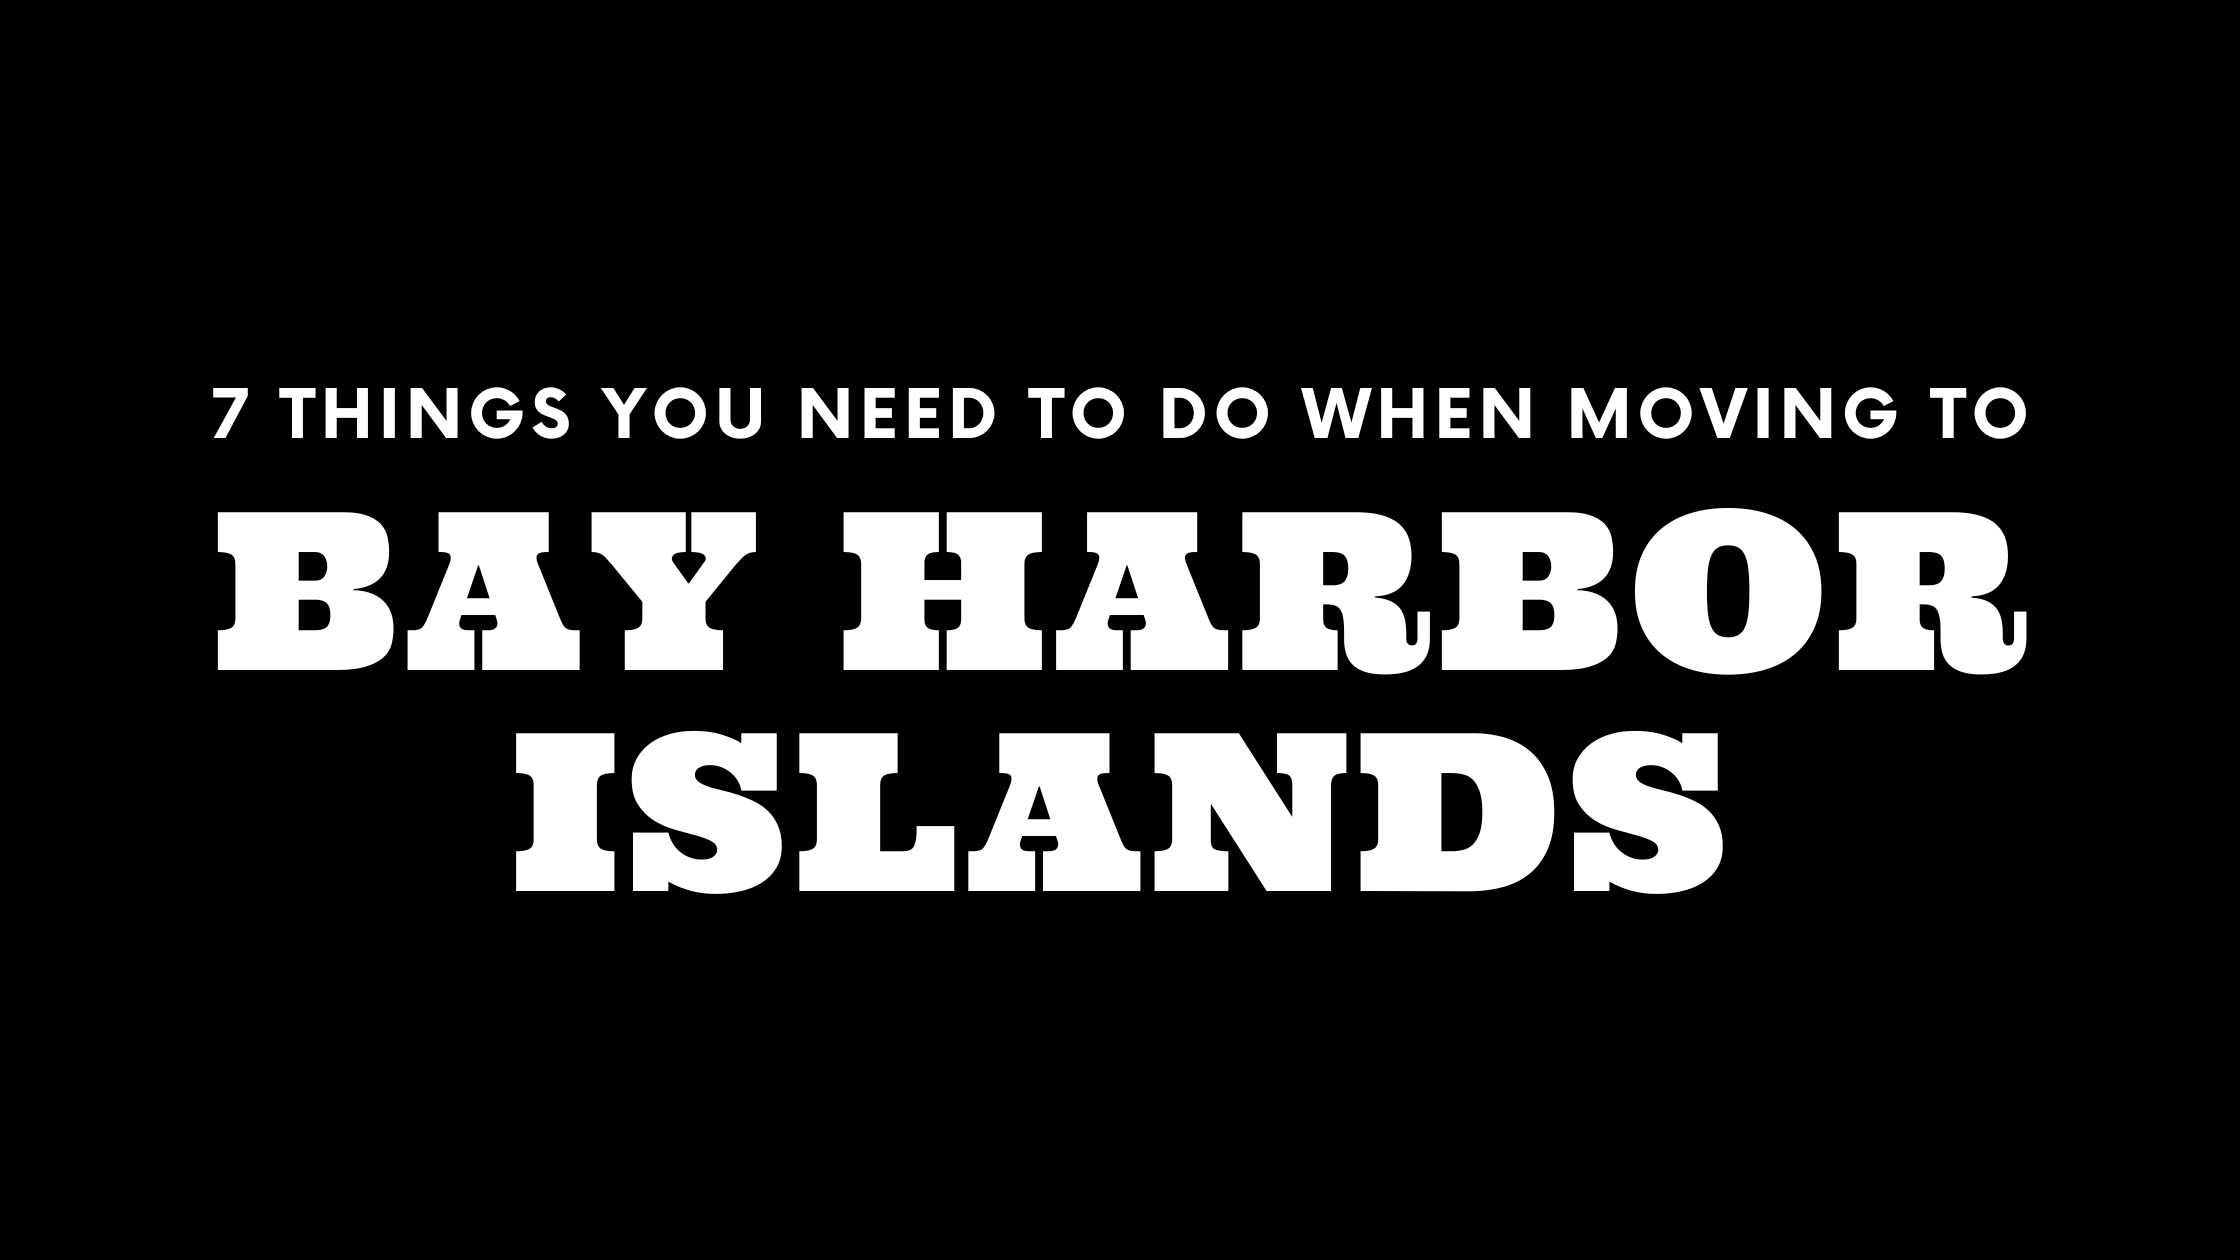 Moving to Bay Harbor Islands? 7 Things You Need To Do Immediately!